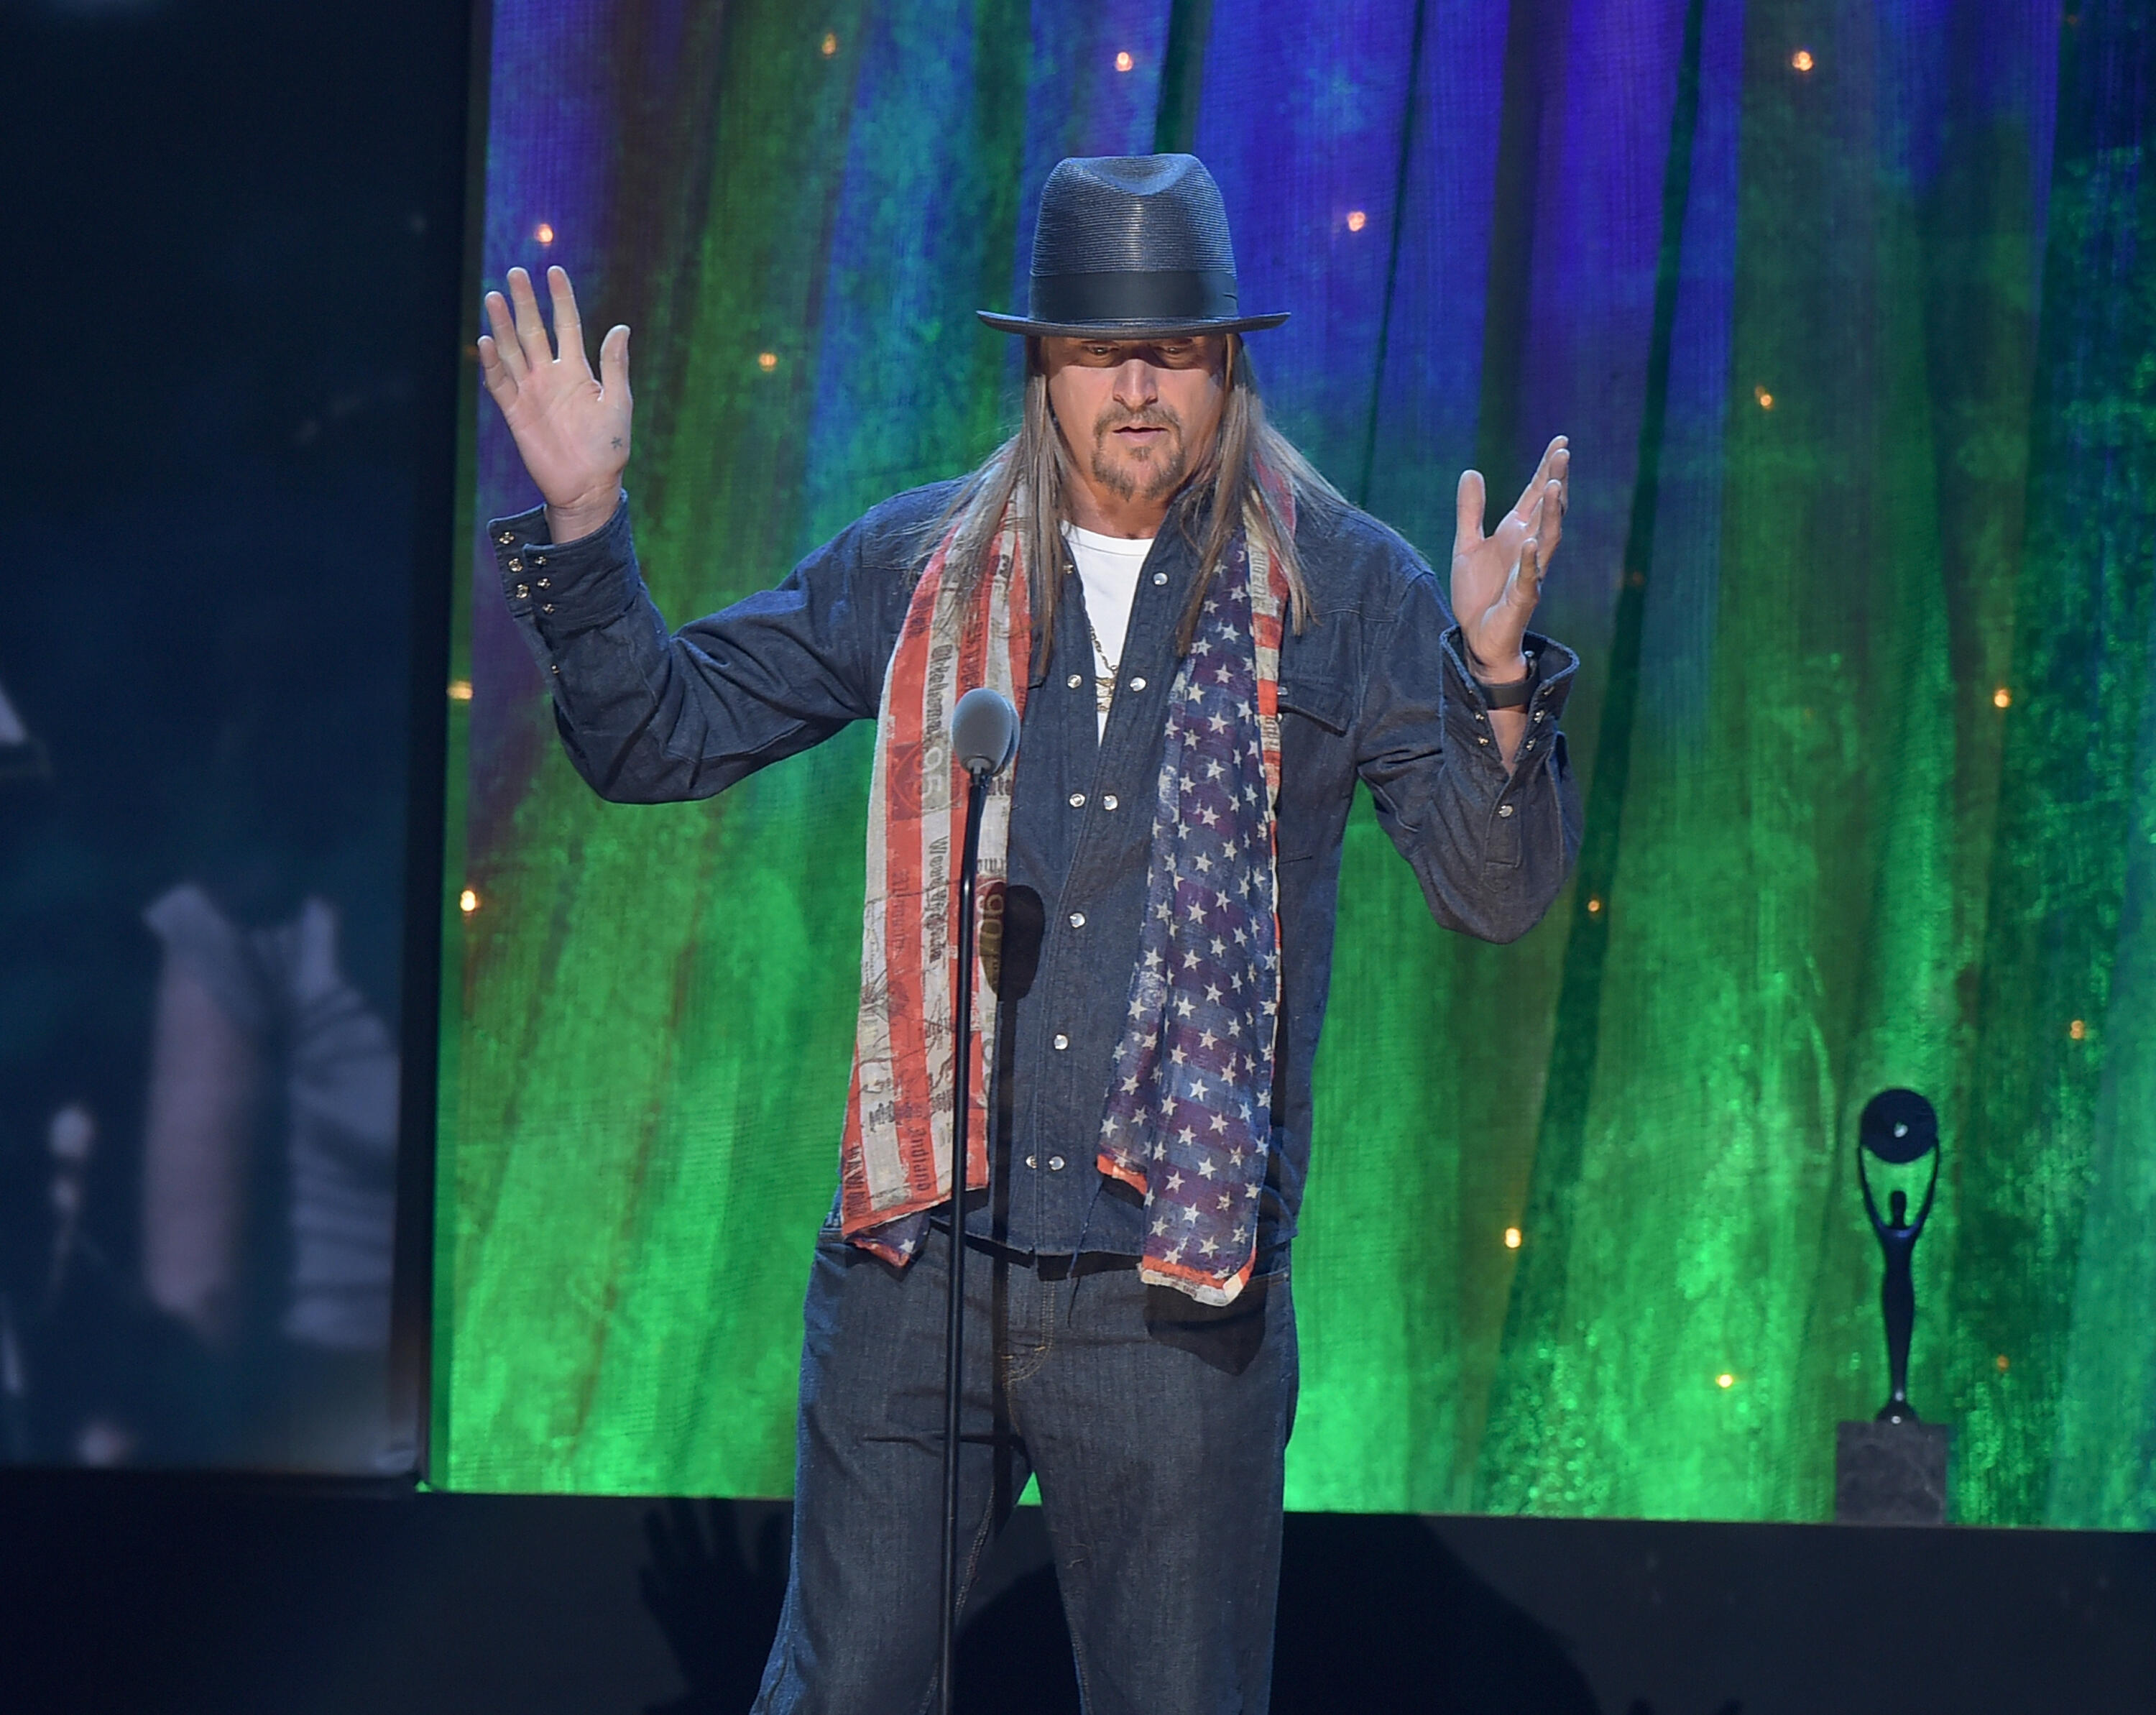 NEW YORK, NEW YORK - APRIL 08:  Kid Rock inducts Cheap Trick at the 31st Annual Rock And Roll Hall Of Fame Induction Ceremony at Barclays Center on April 8, 2016 in New York City.  (Photo by Theo Wargo/Getty Images)